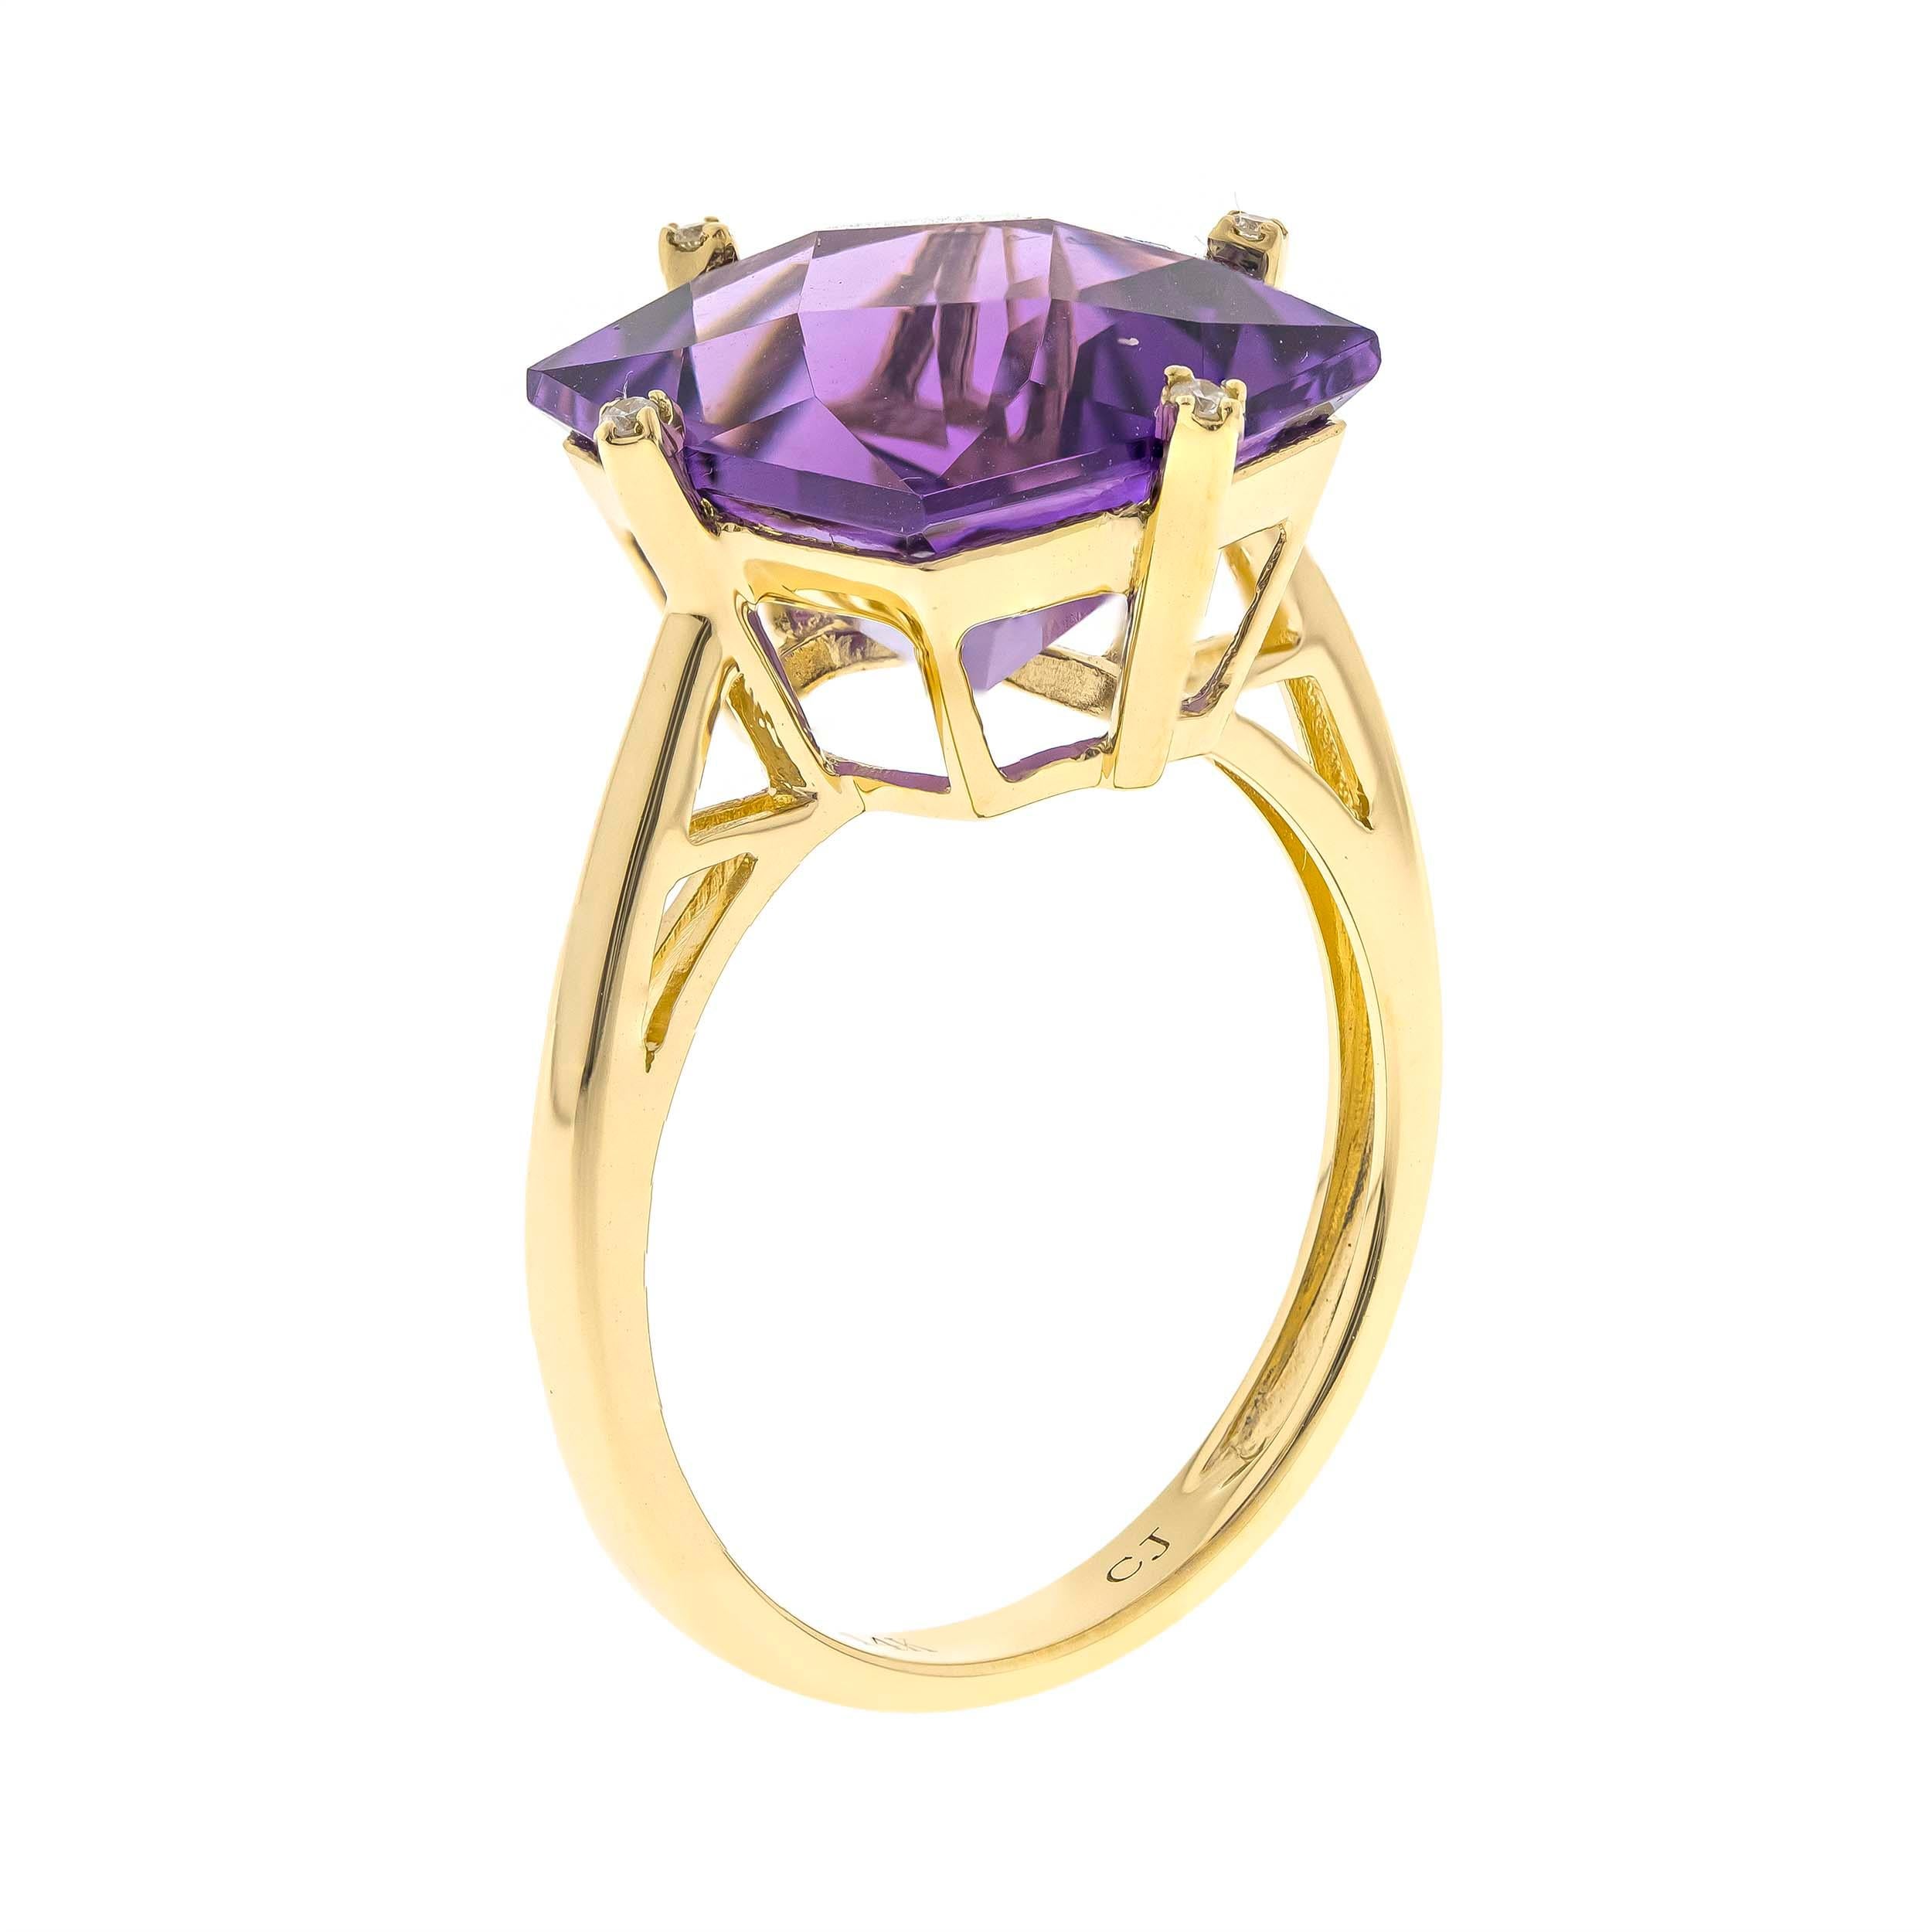 Art Deco 5.42 carat Cushion-cut Amethyst With Diamond accents 14K Yellow Gold Ring. For Sale